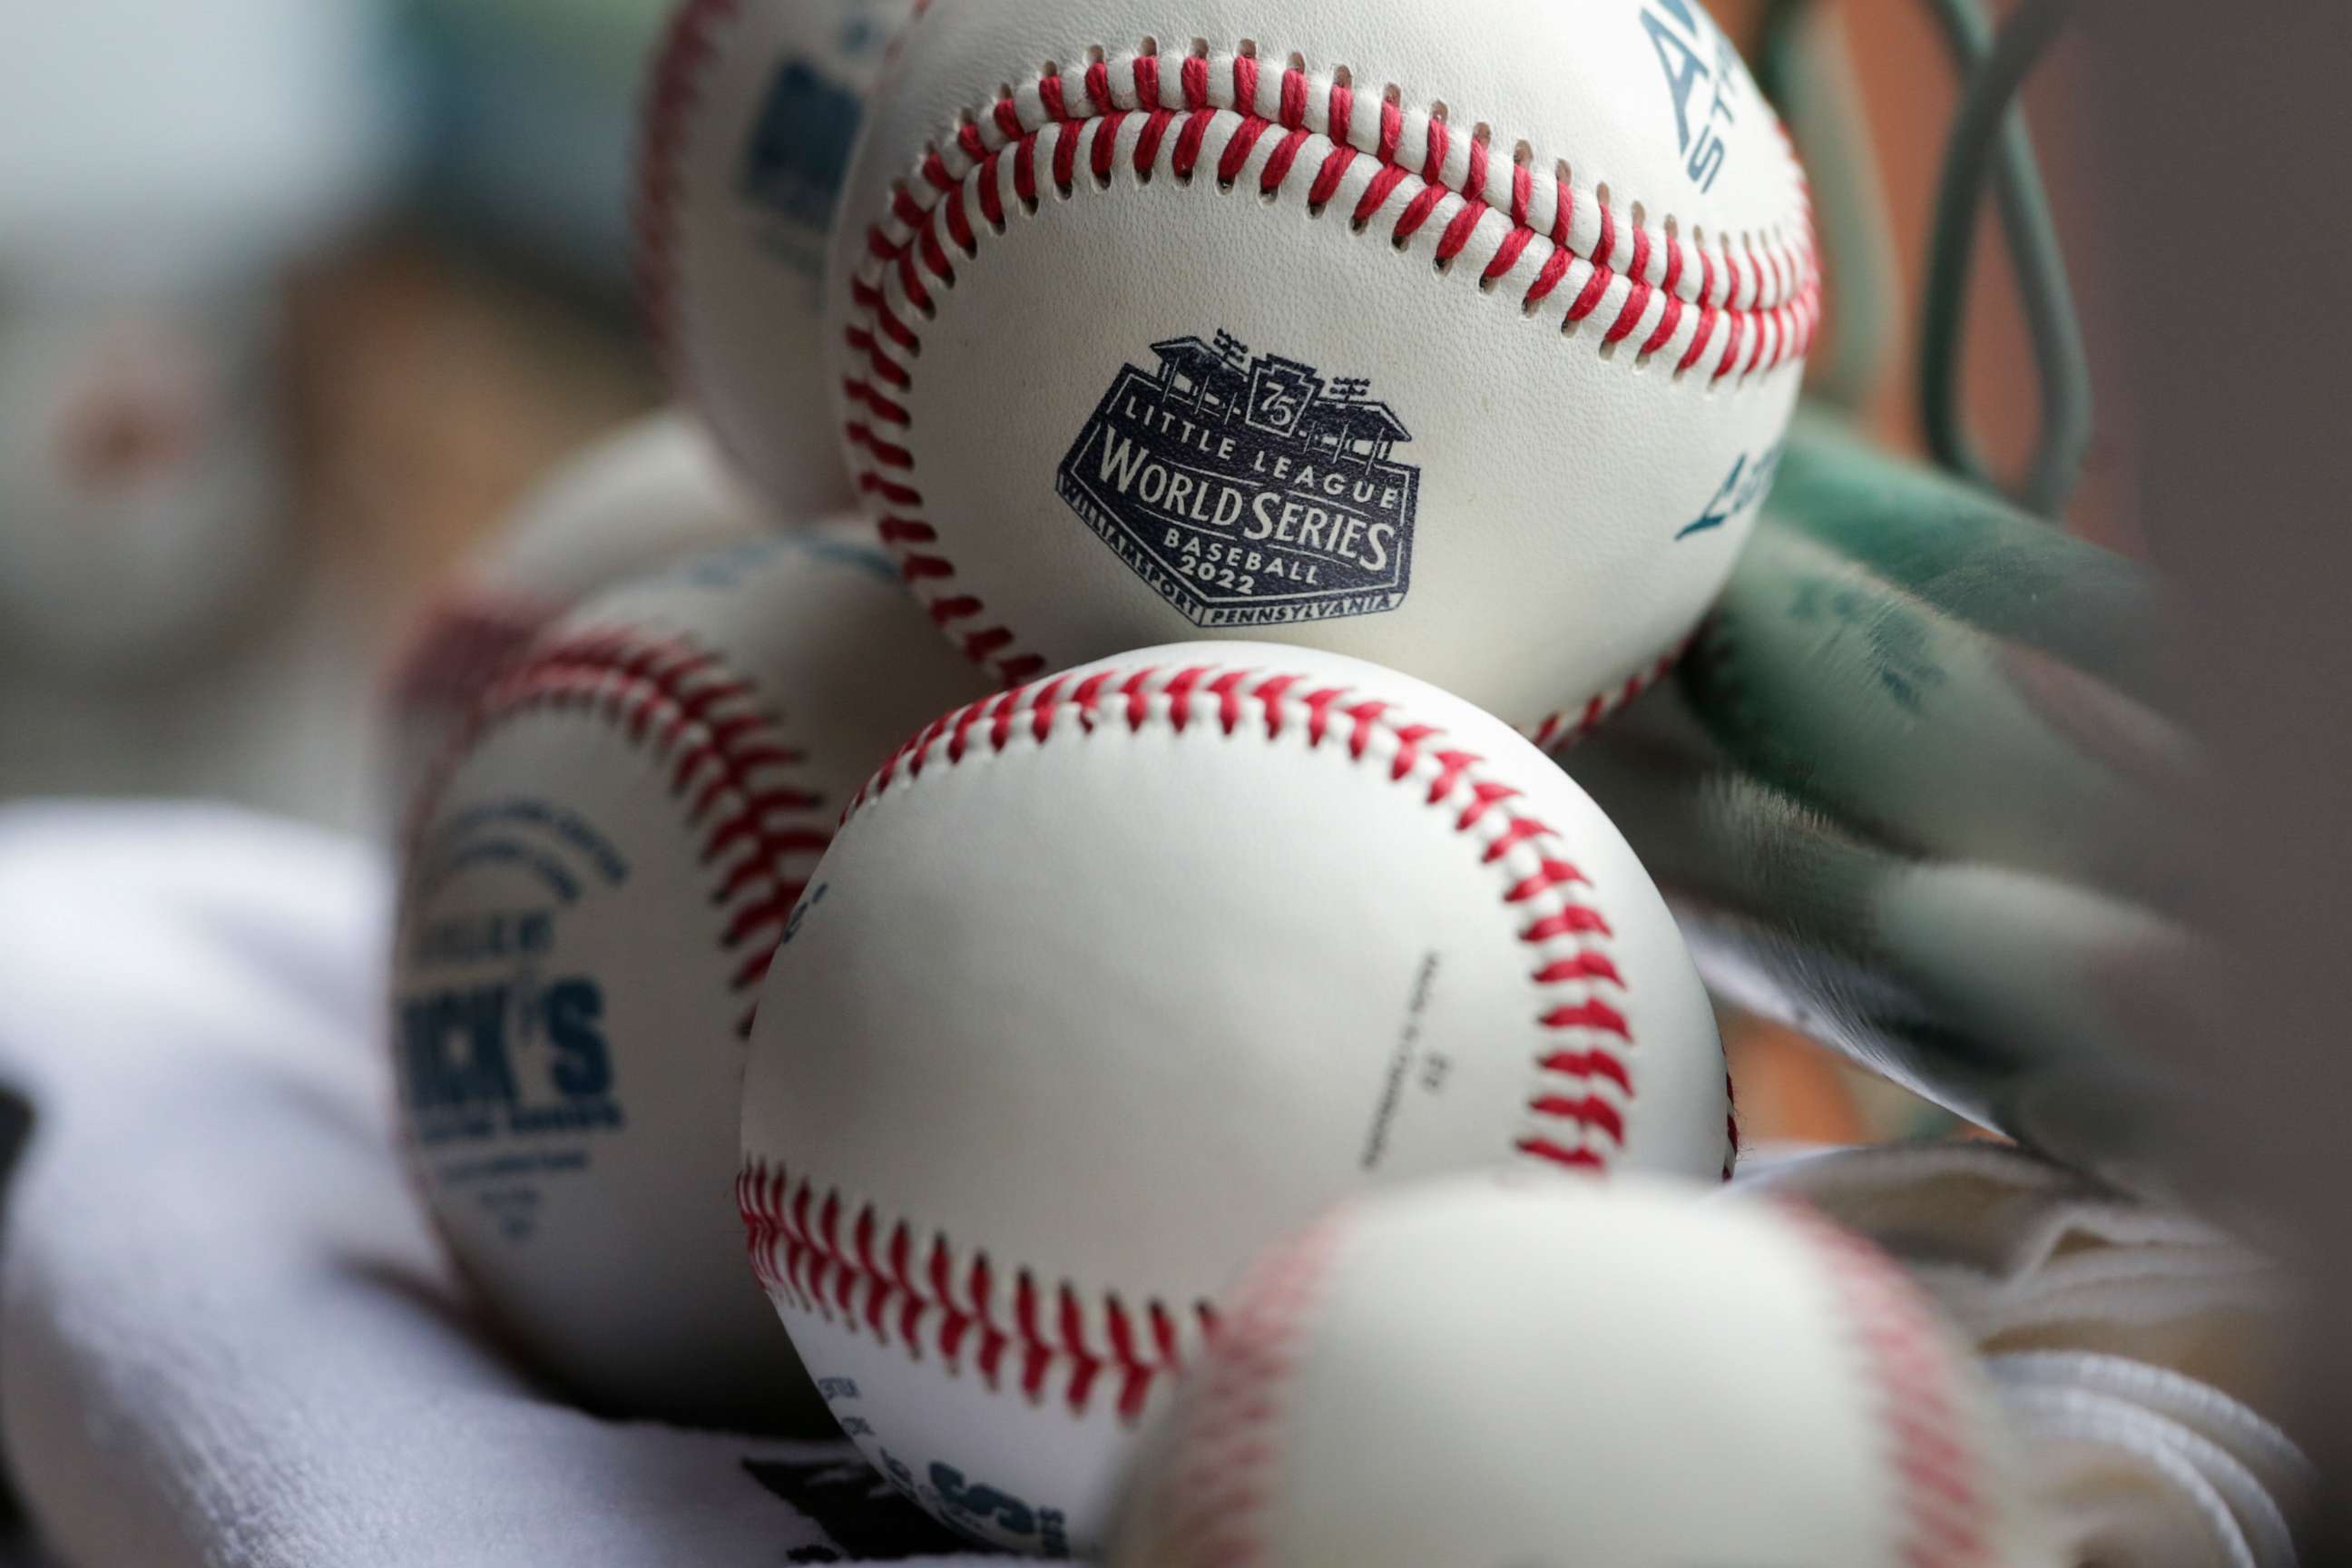 PHOTO: Little League World Series balls are stacked before a Little League World Series consolation game at Little League International Complex on Aug. 28, 2022 in South Williamsport, Penn.